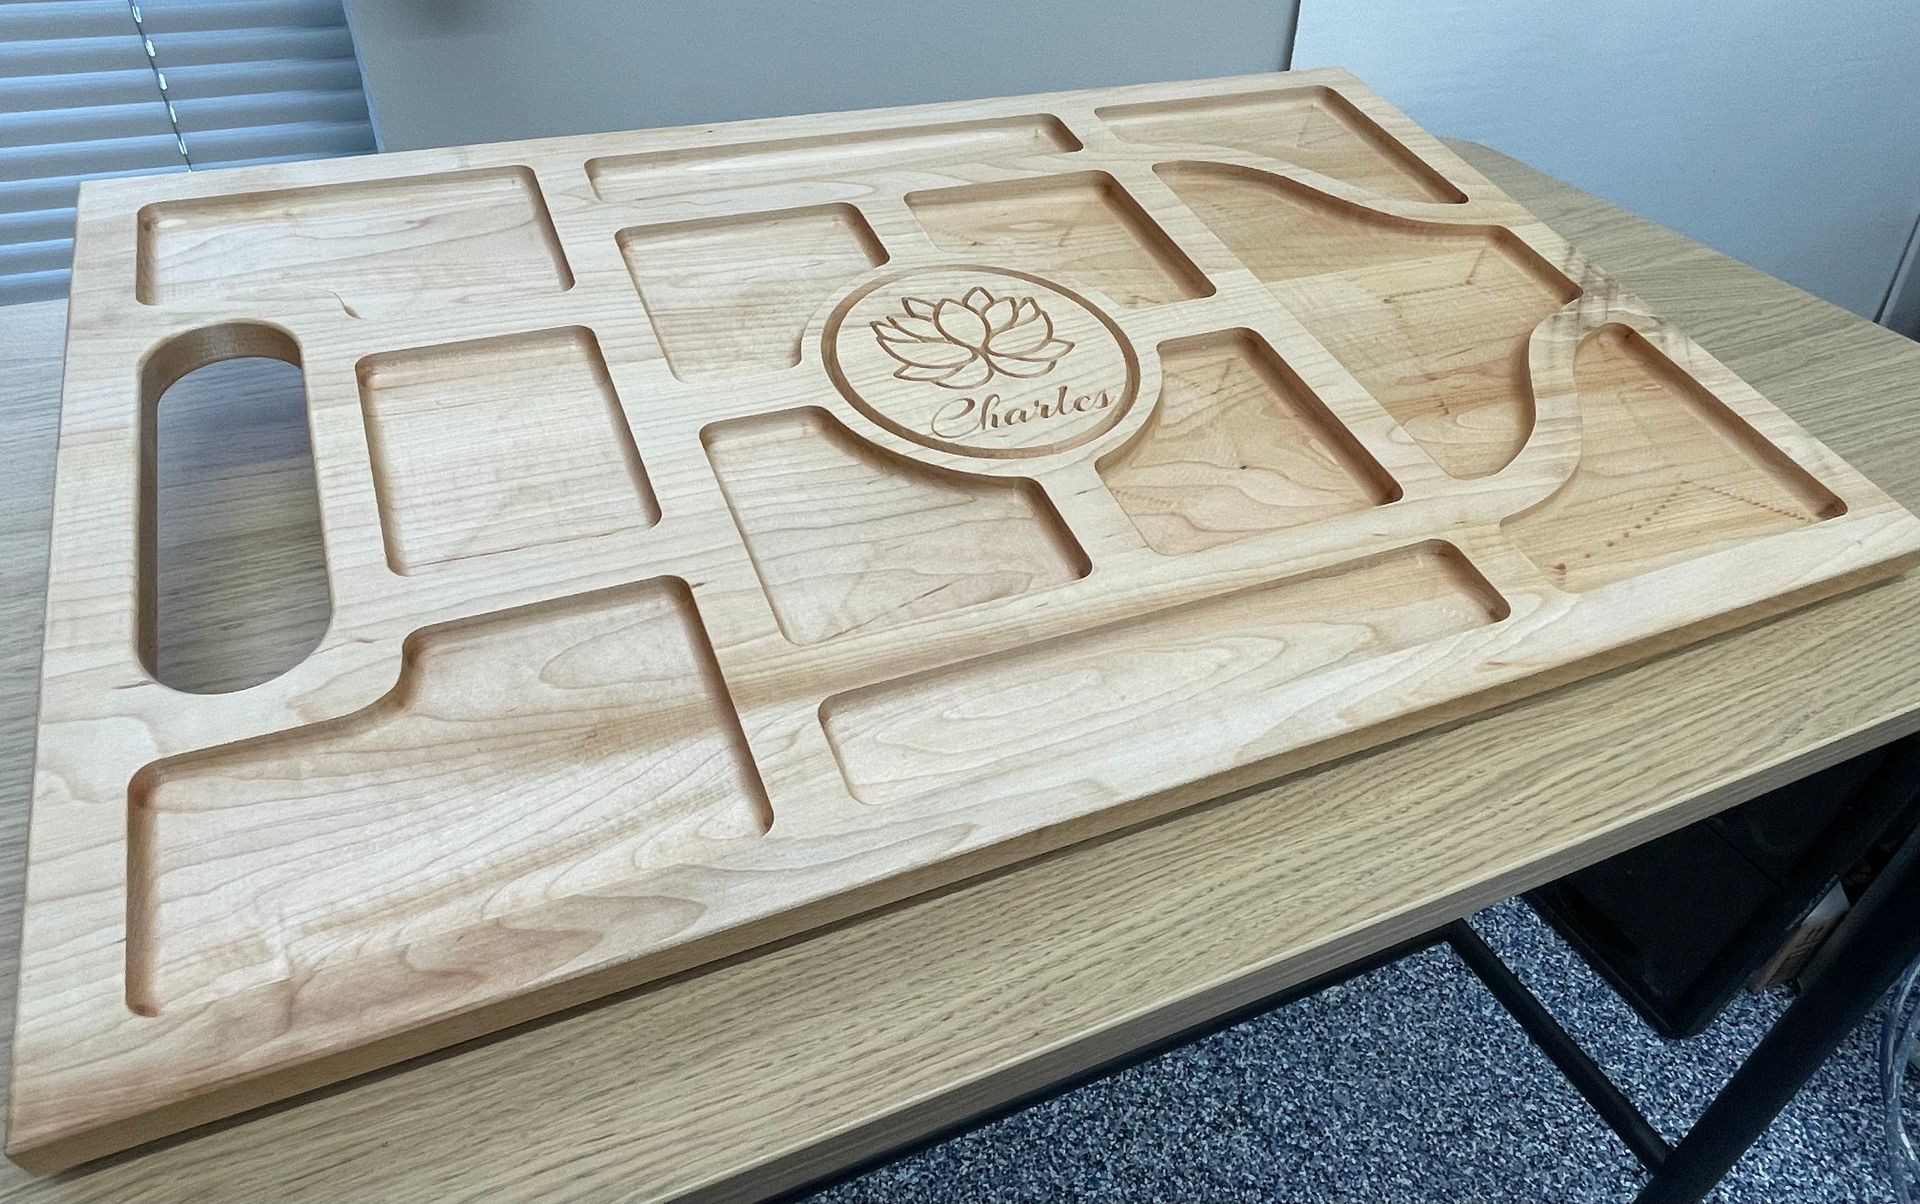 A wooden tray is sitting on a wooden table.